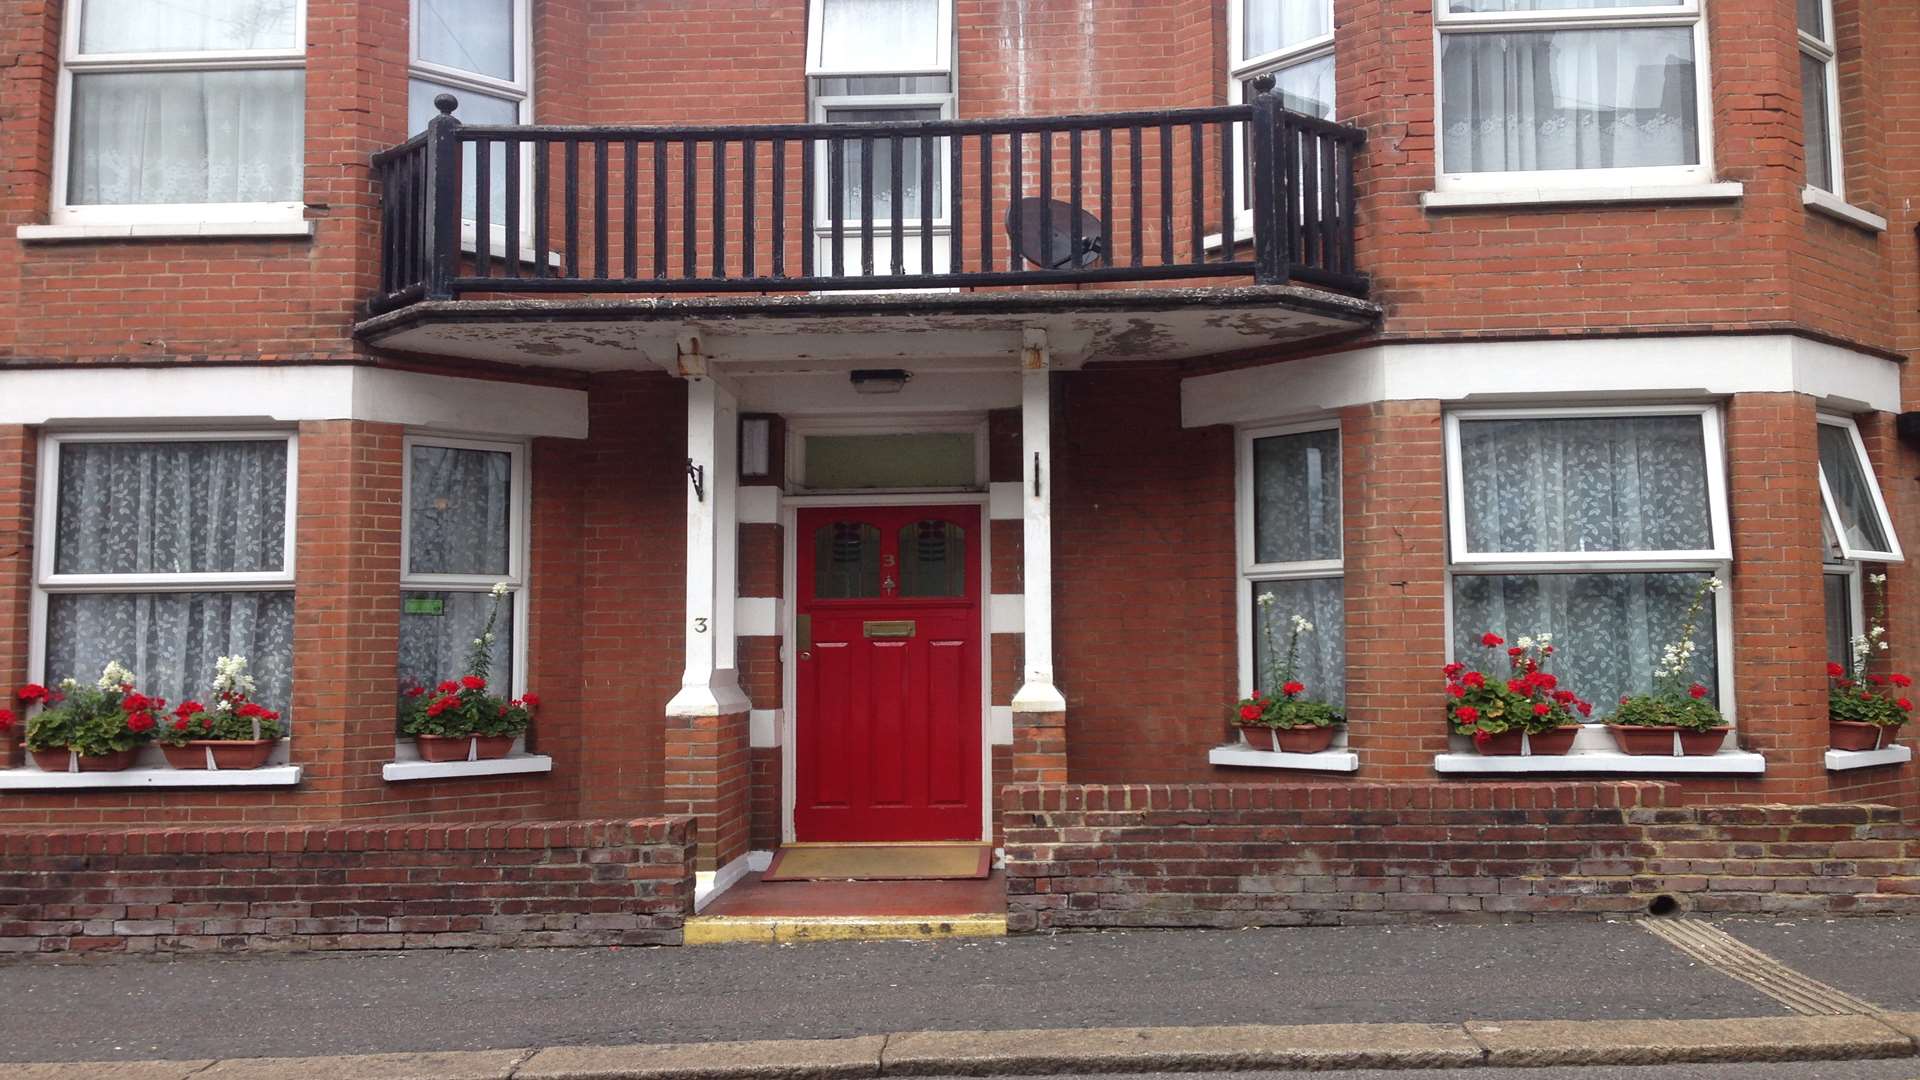 The abuse happened at the Homeleigh residential care home